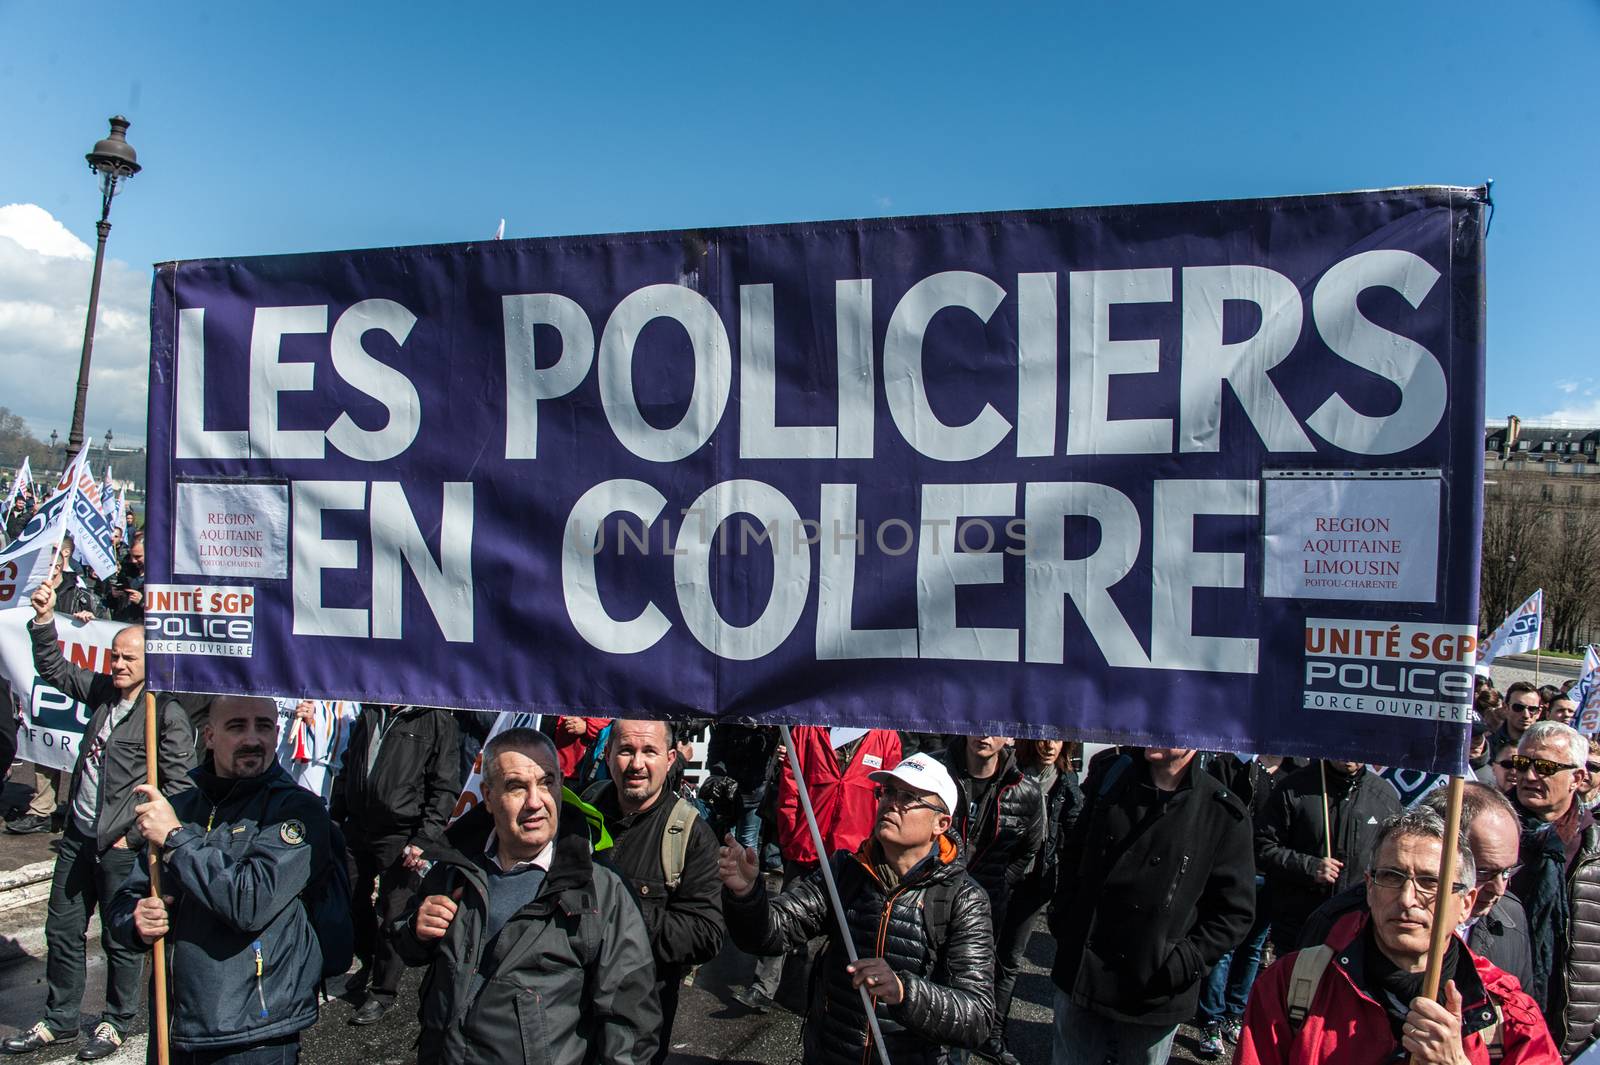 FRANCE, Paris : Police officers wave union flags as they take part in a protest called by the Unite-police SGP-FO police officers' union in Paris on April 7, 2016.A few thousand police officers, 8,000 according to organizers and 2,000 according to other police sources, demonstrated in Paris to demand the increase of a risk premium, in the wake of recent attacks and the state of emergency that is wearing out forces. 